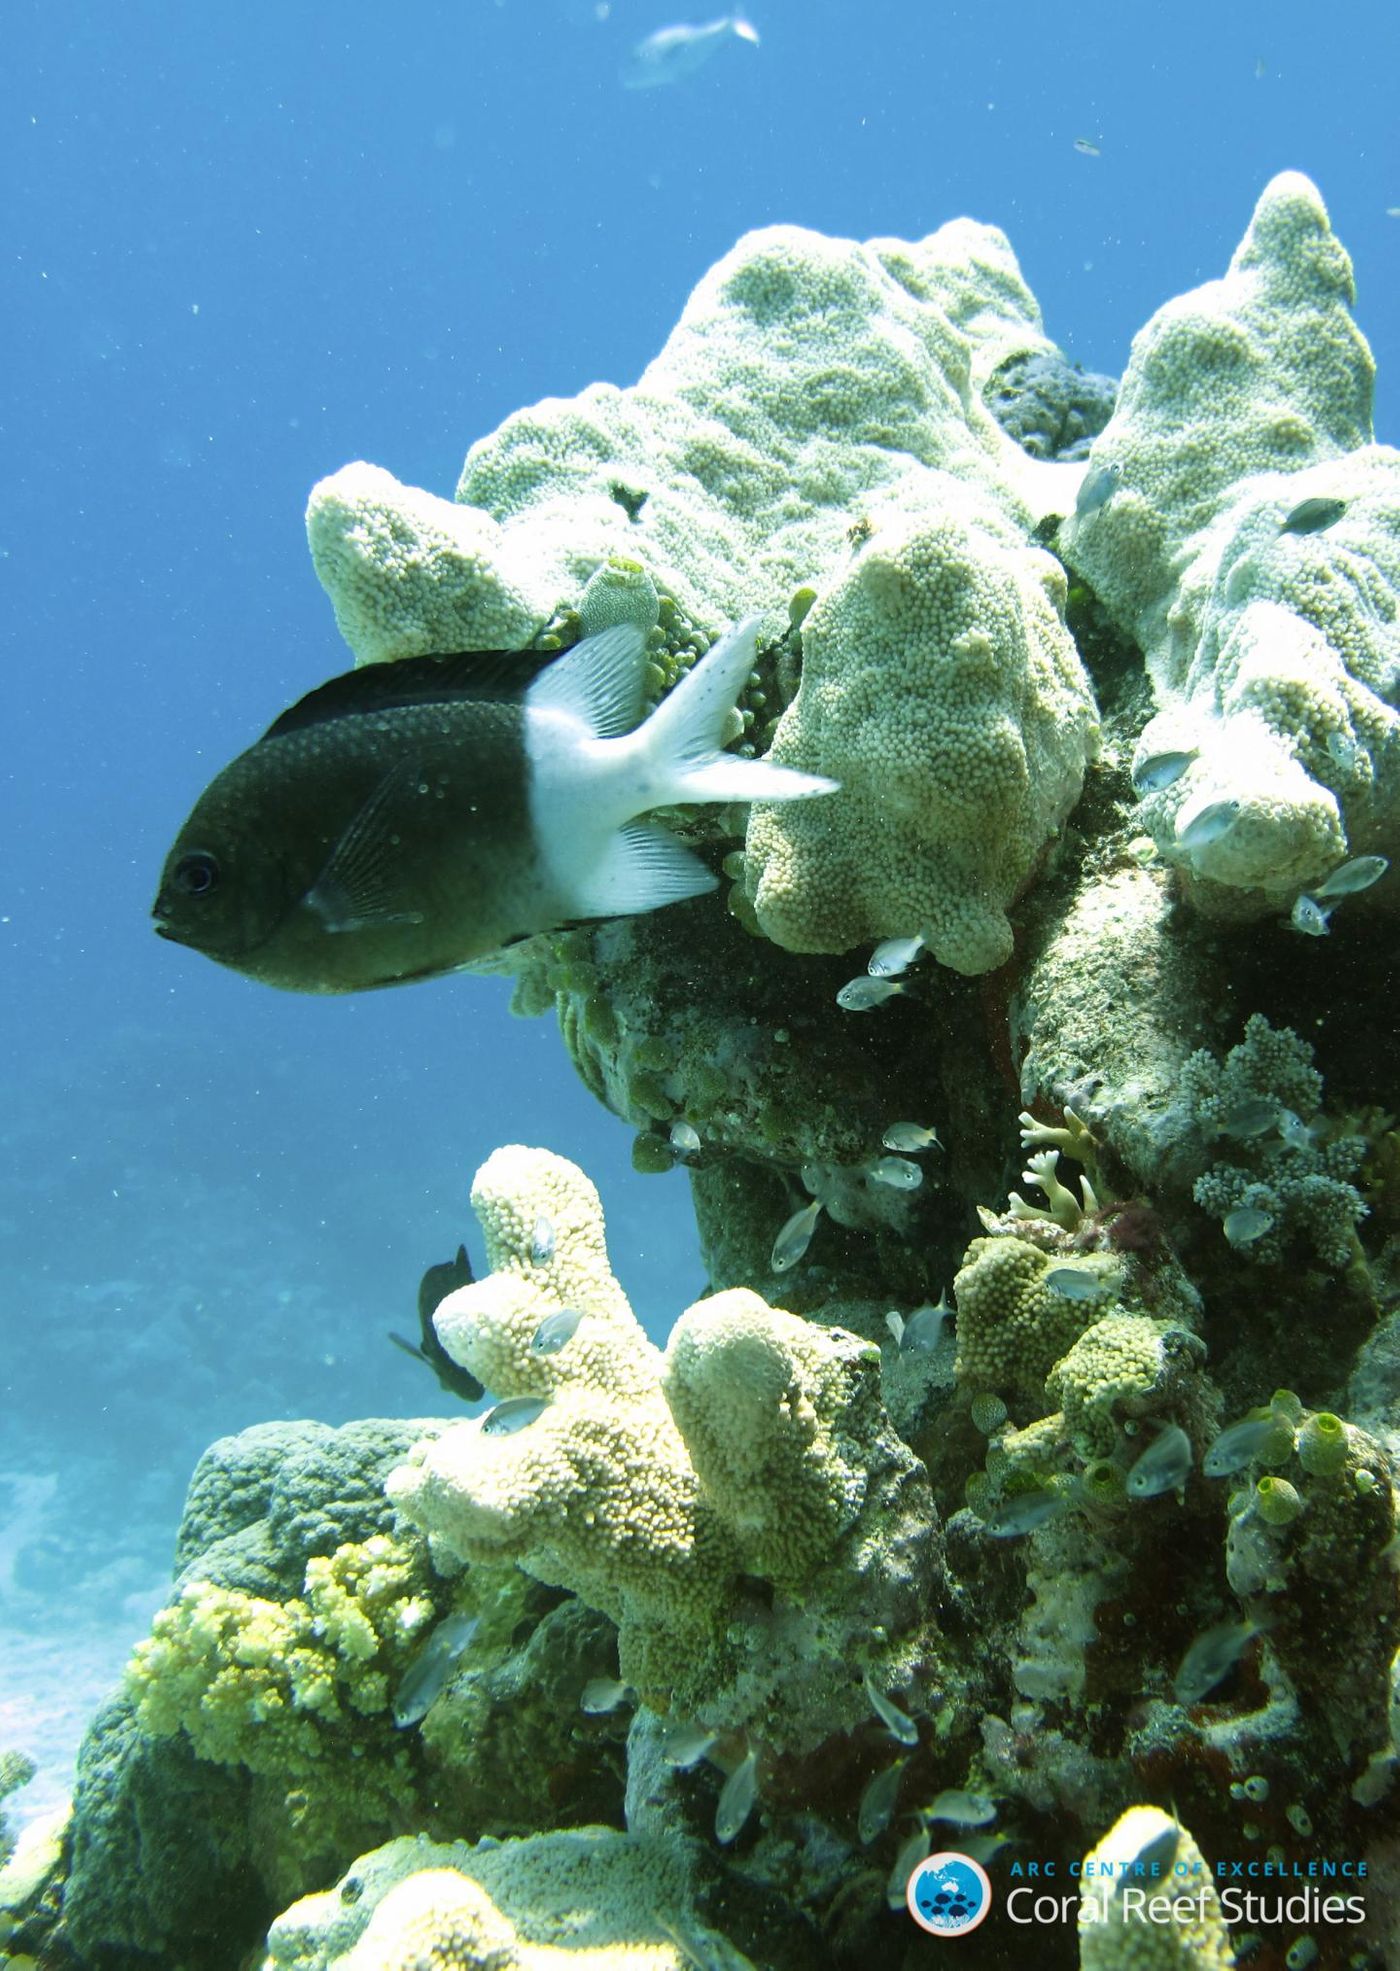 Some reef fish may exhibit natural self-defense mechanisms to protect against climate change.